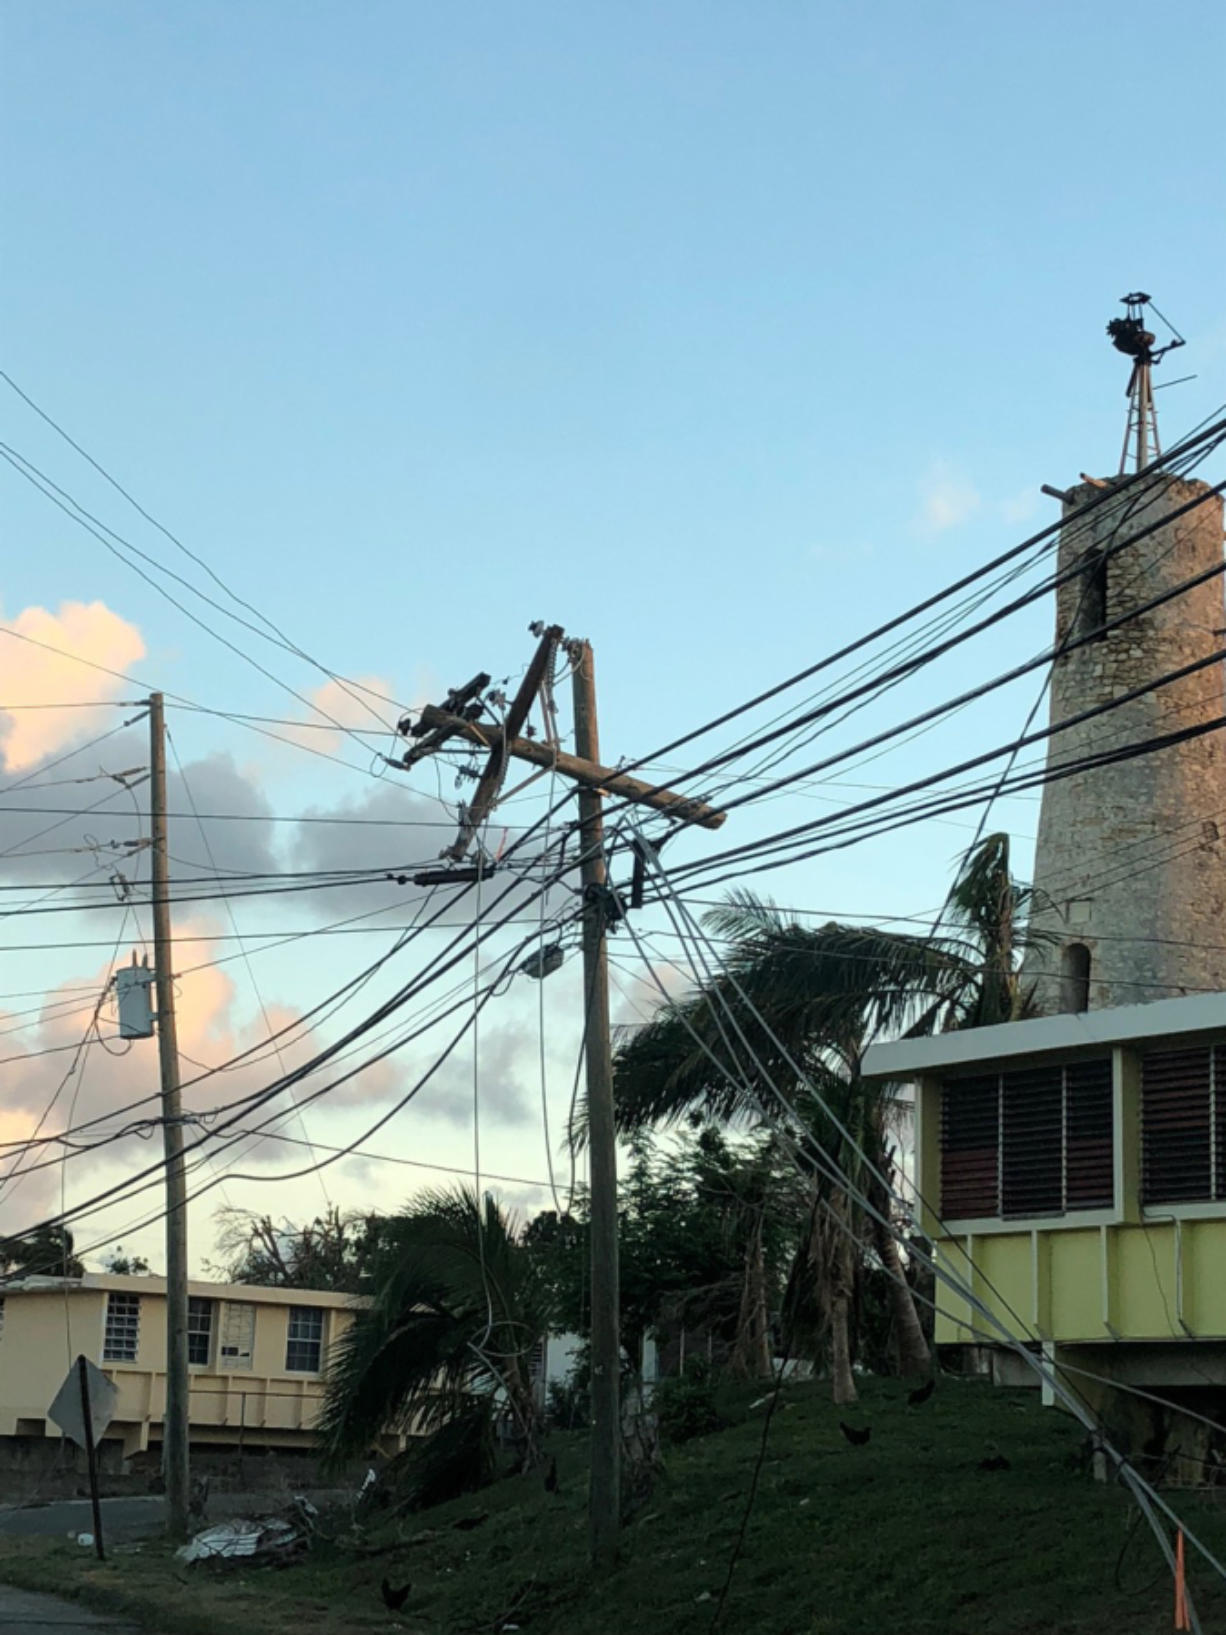 Don LiDrazzah of Vancouver has been in St. Croix for the past month helping rebuild power lines devastated by Hurricane Maria.